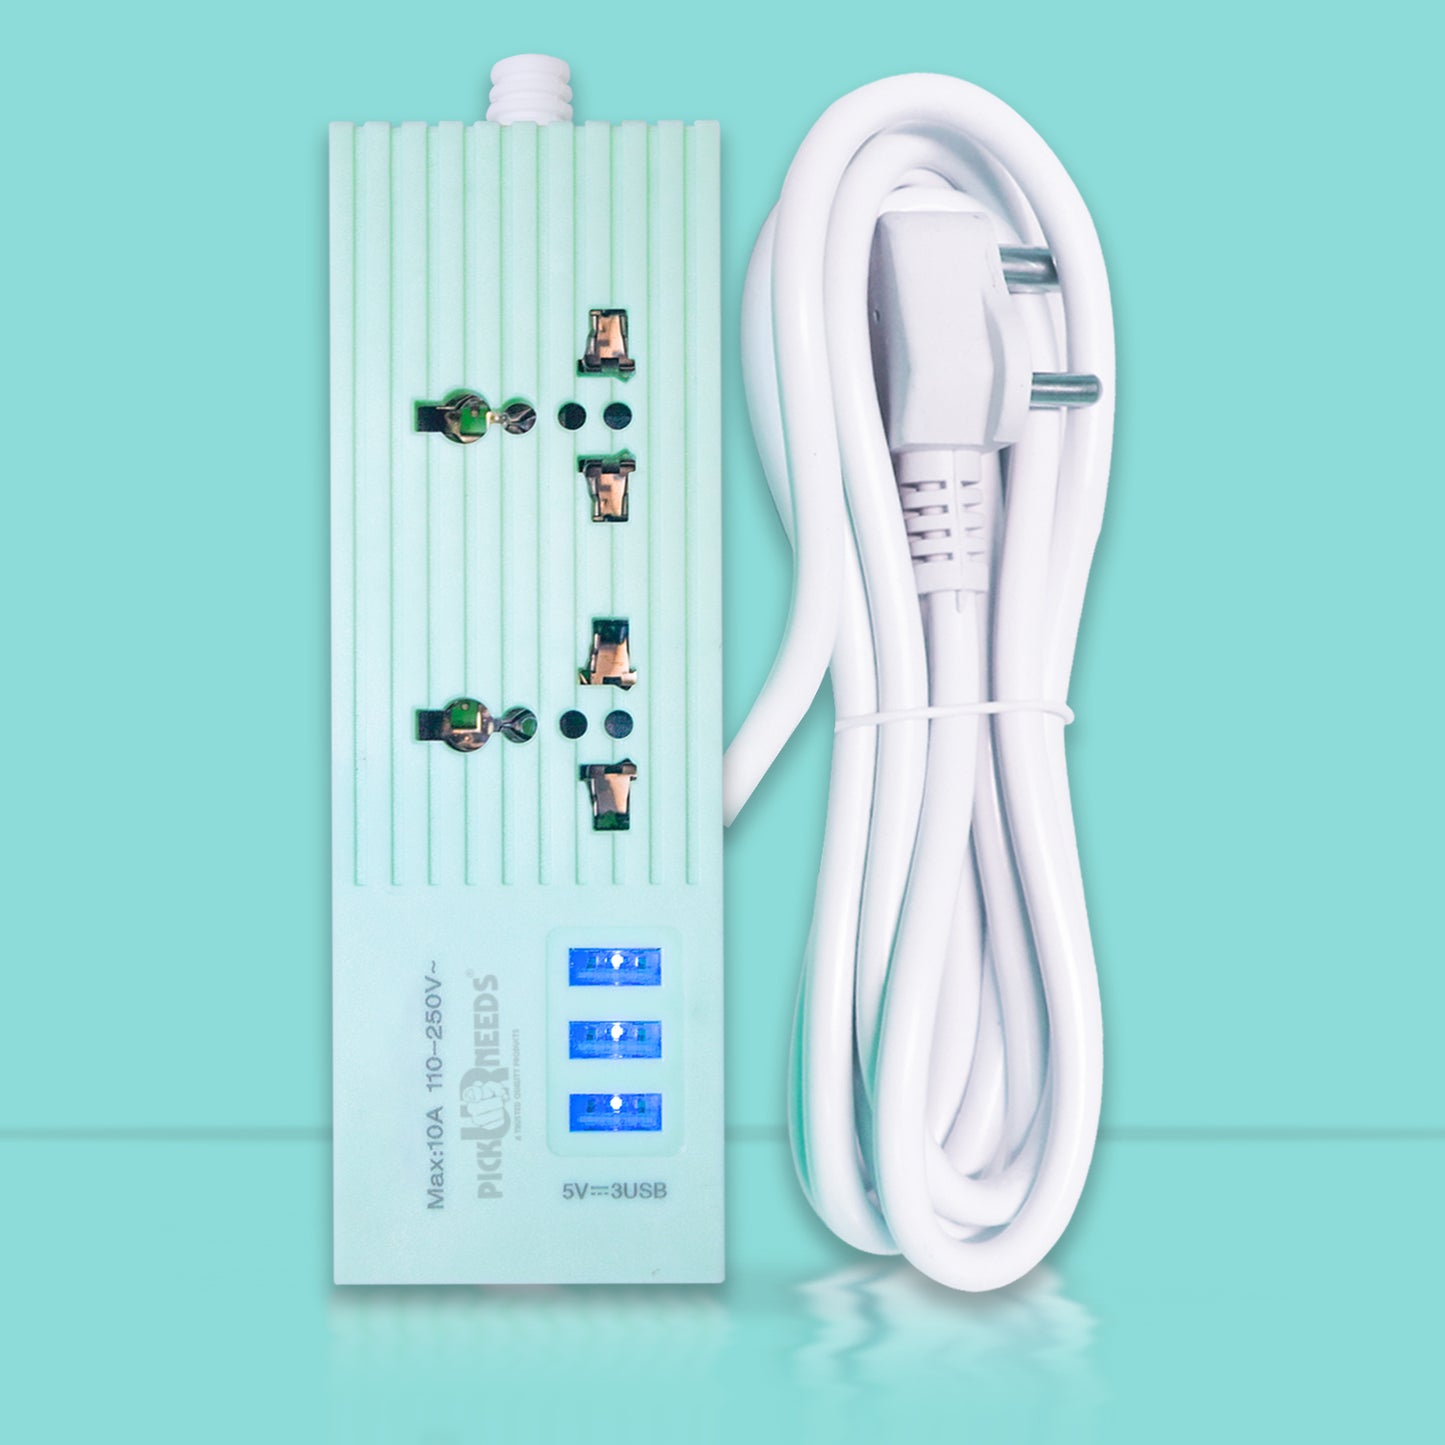 Pick Ur Needs Extension Cord 10A with Universal 2 Socket & 3 USB Port Extension Boards for Multiple Use